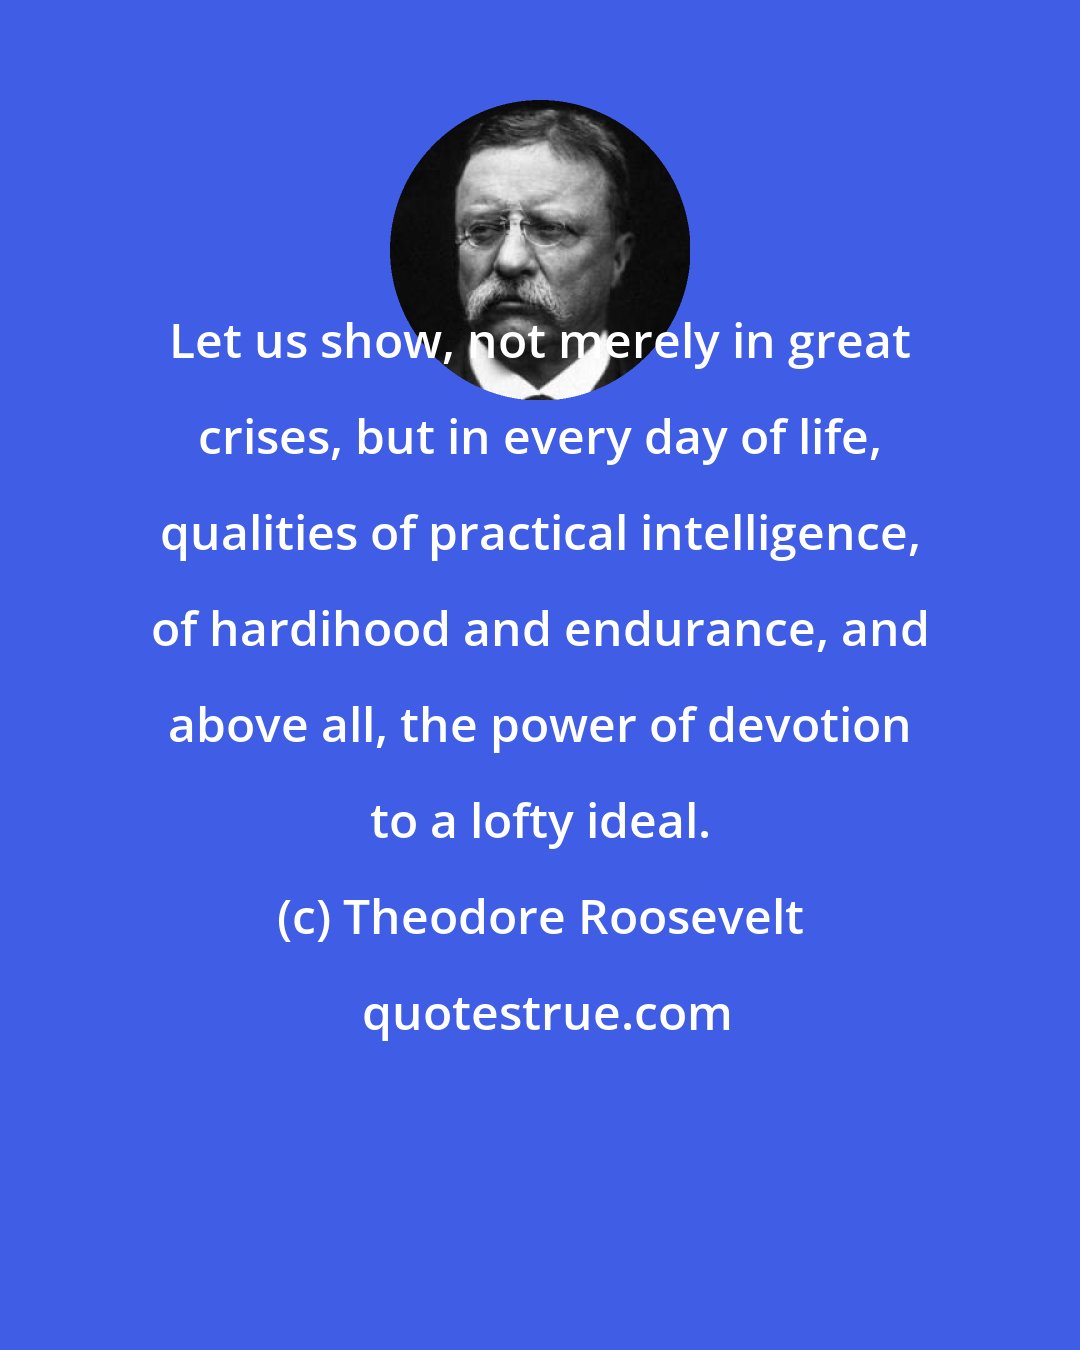 Theodore Roosevelt: Let us show, not merely in great crises, but in every day of life, qualities of practical intelligence, of hardihood and endurance, and above all, the power of devotion to a lofty ideal.